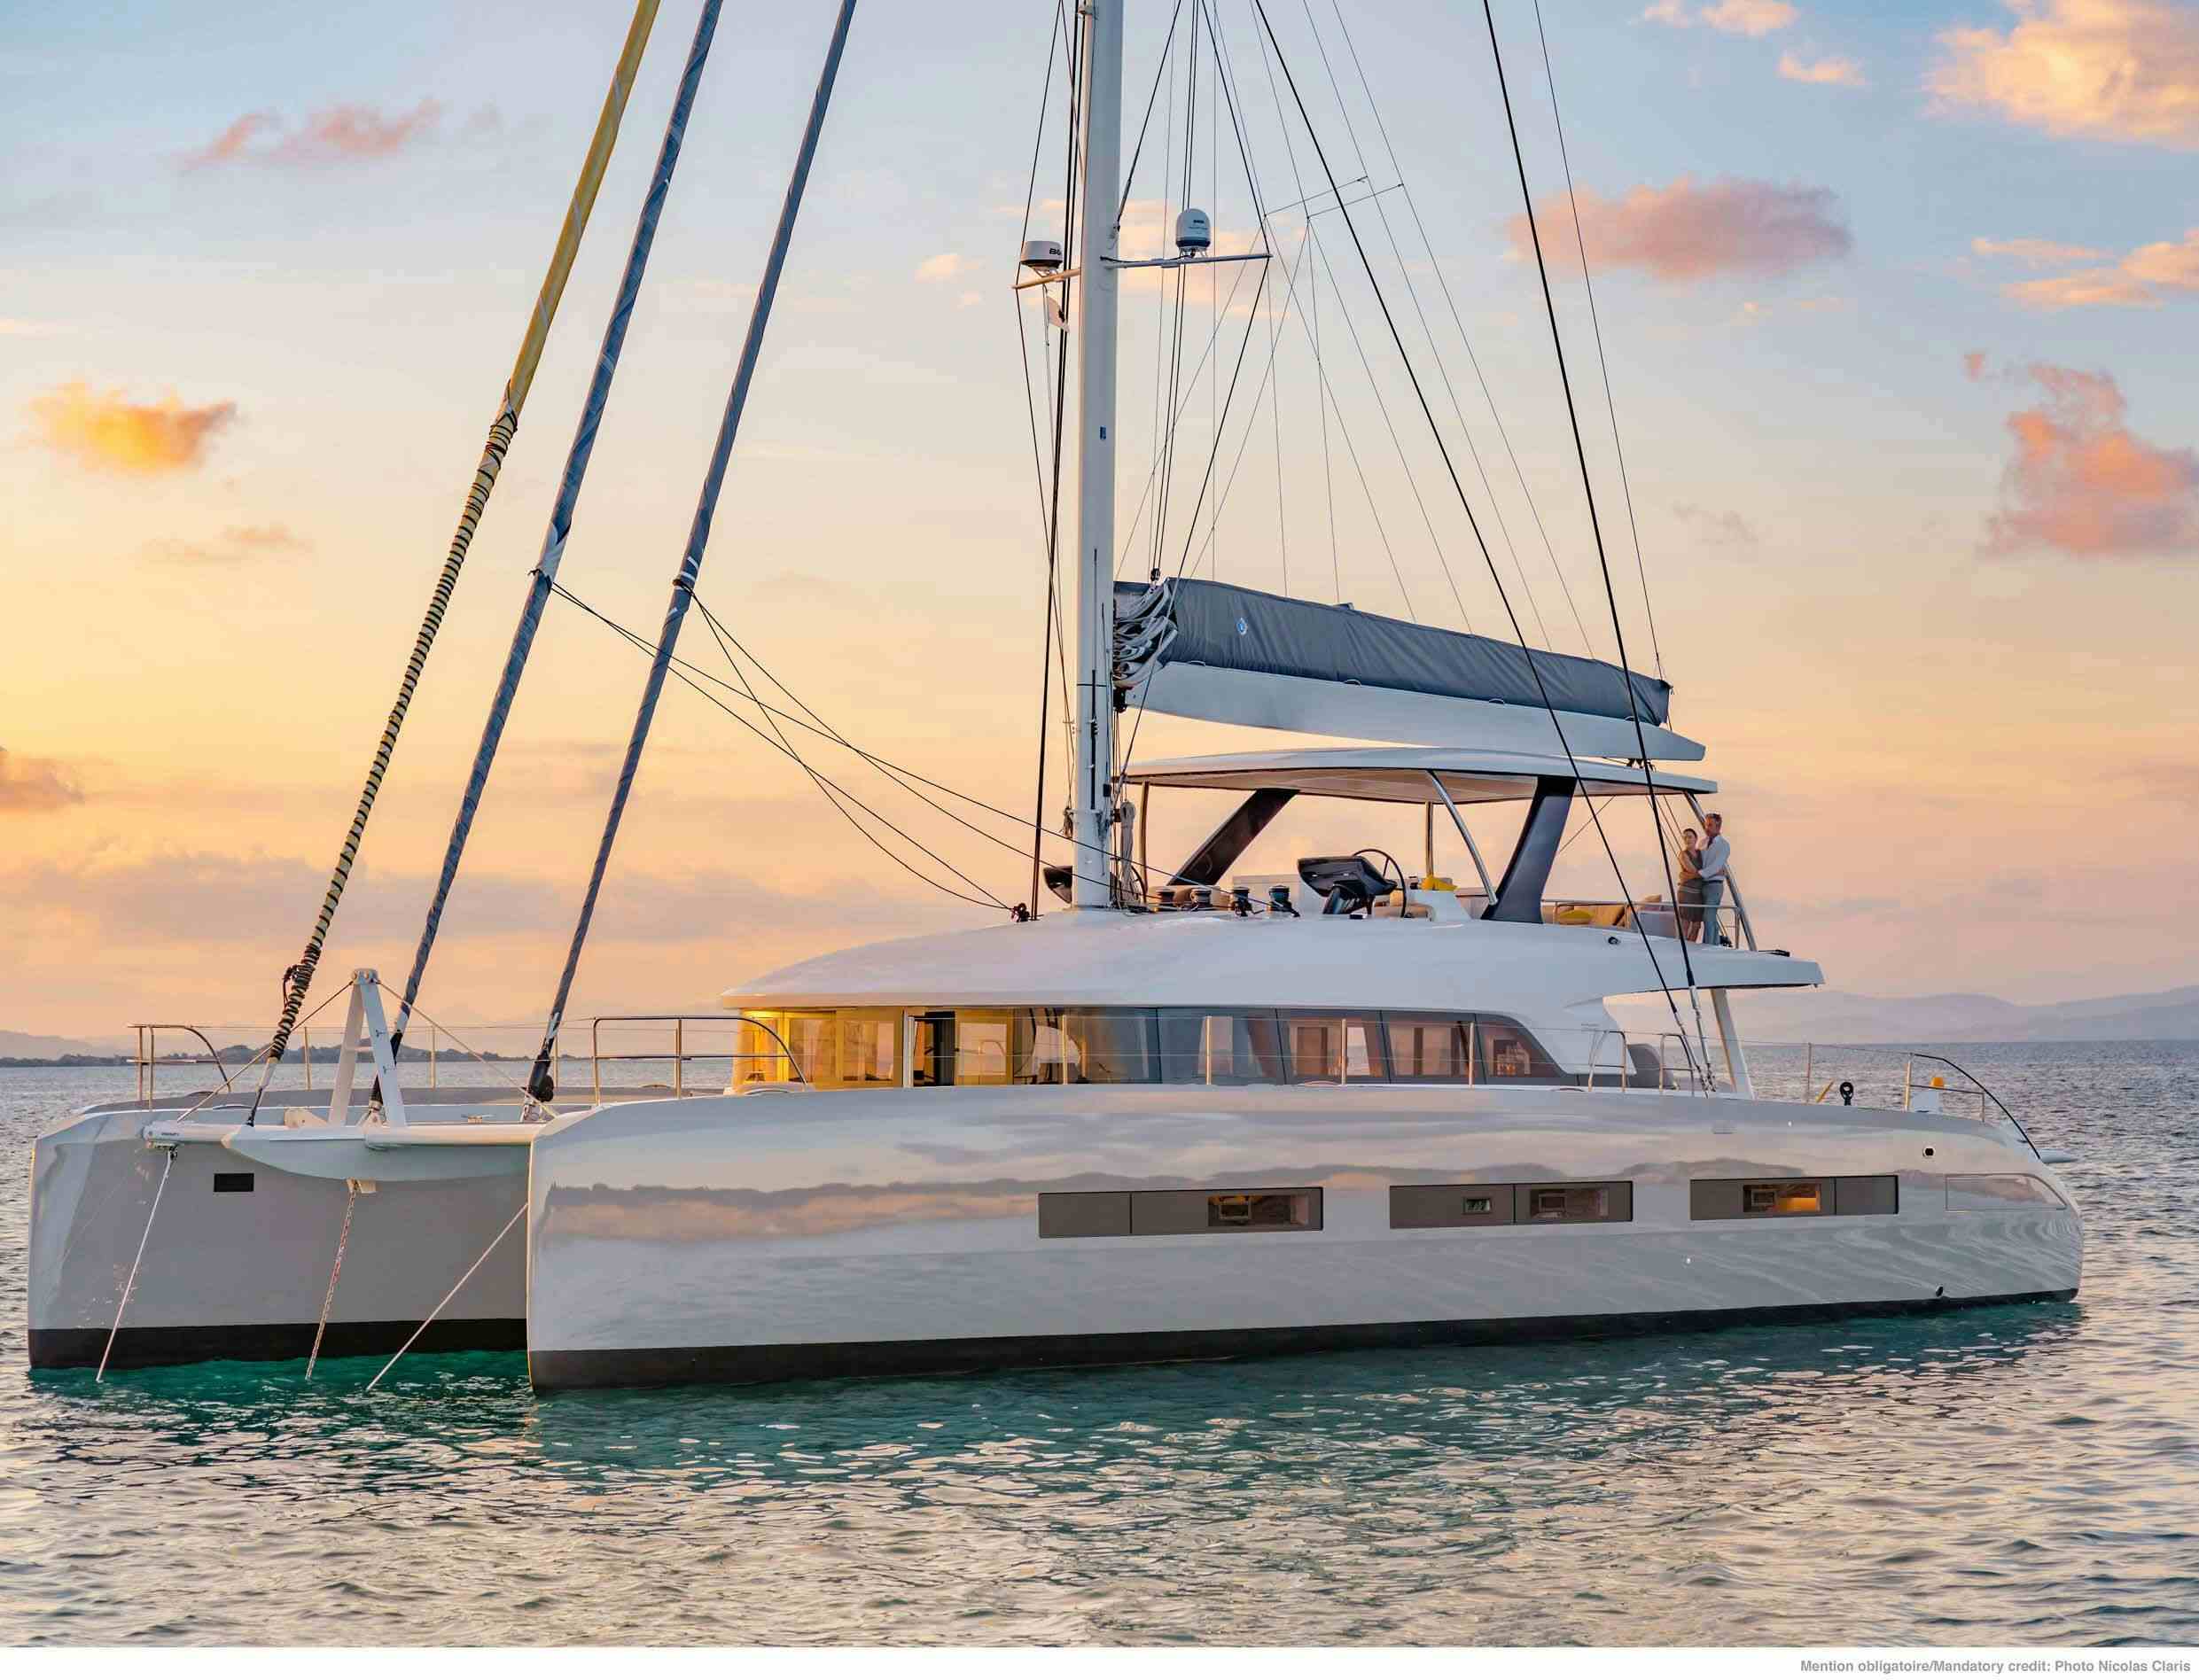 SYLENE - Yacht Charter The Canaries & Boat hire in W. Med -Naples/Sicily, W. Med -Riviera/Cors/Sard., Caribbean Leewards, Caribbean Windwards, Turkey, W. Med - Spain/Balearics, Caribbean Leewards, Caribbean Windwards 1